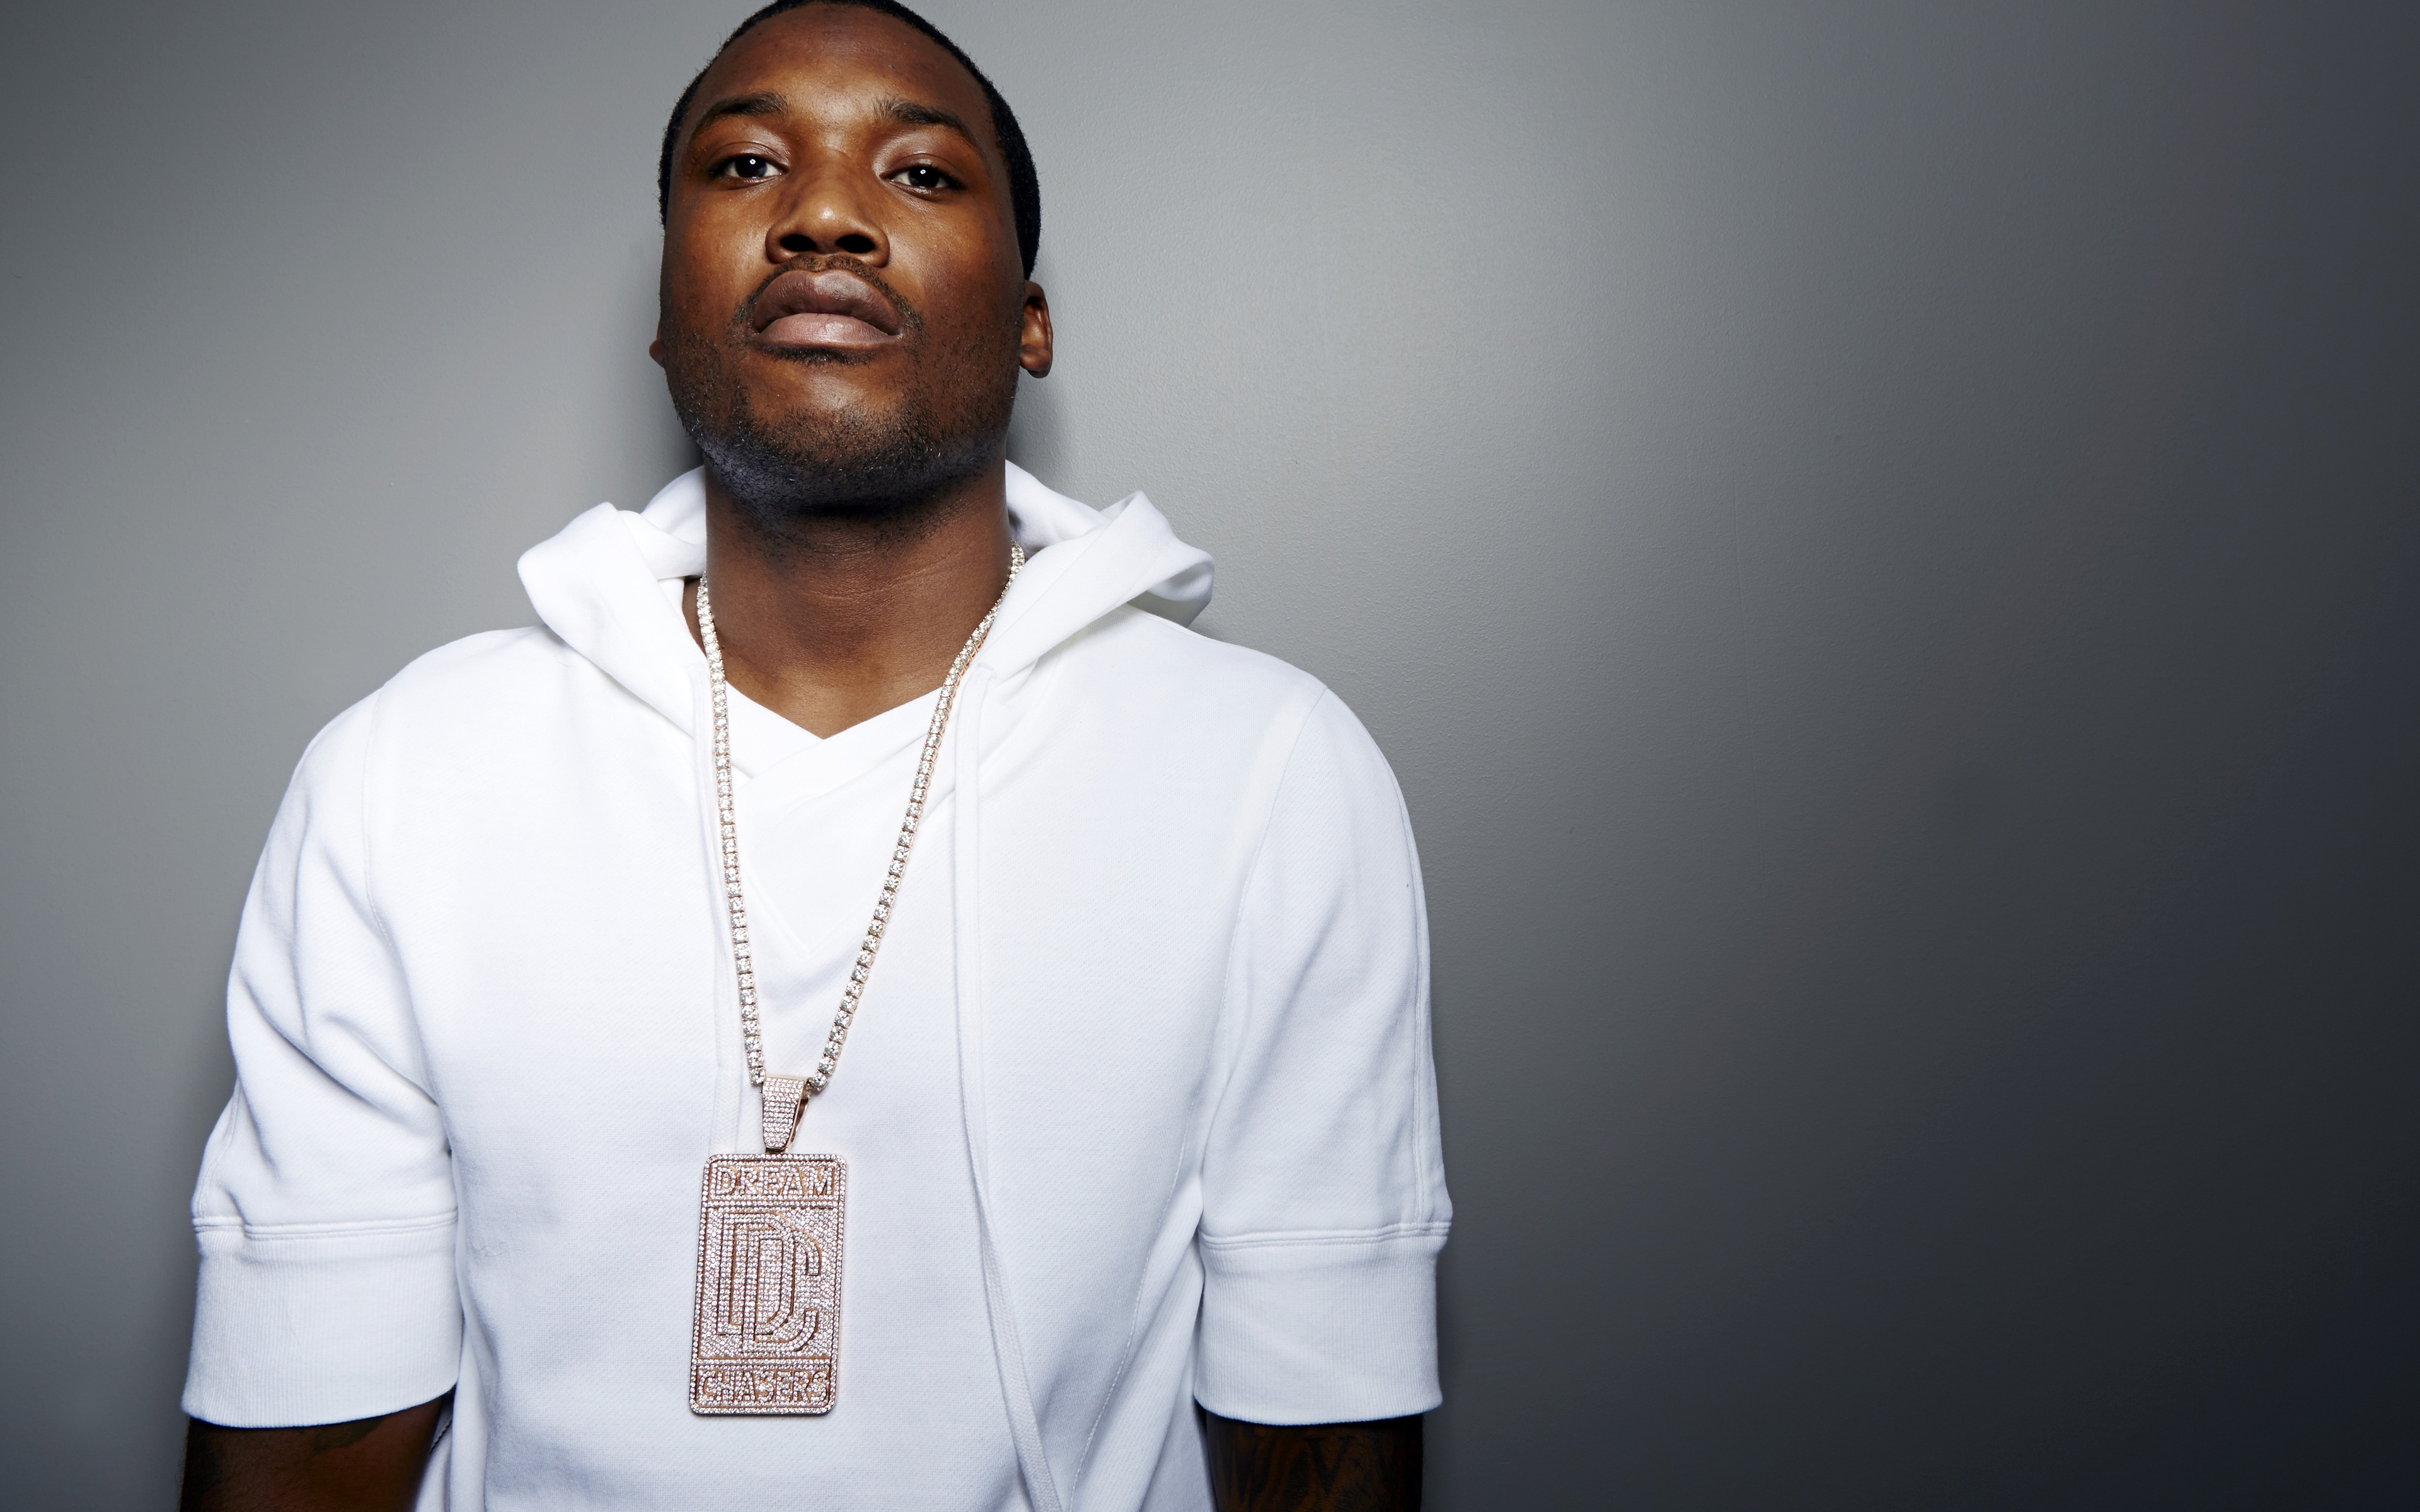 Meek Mill Look for 3840 x 2400 Widescreen resolution